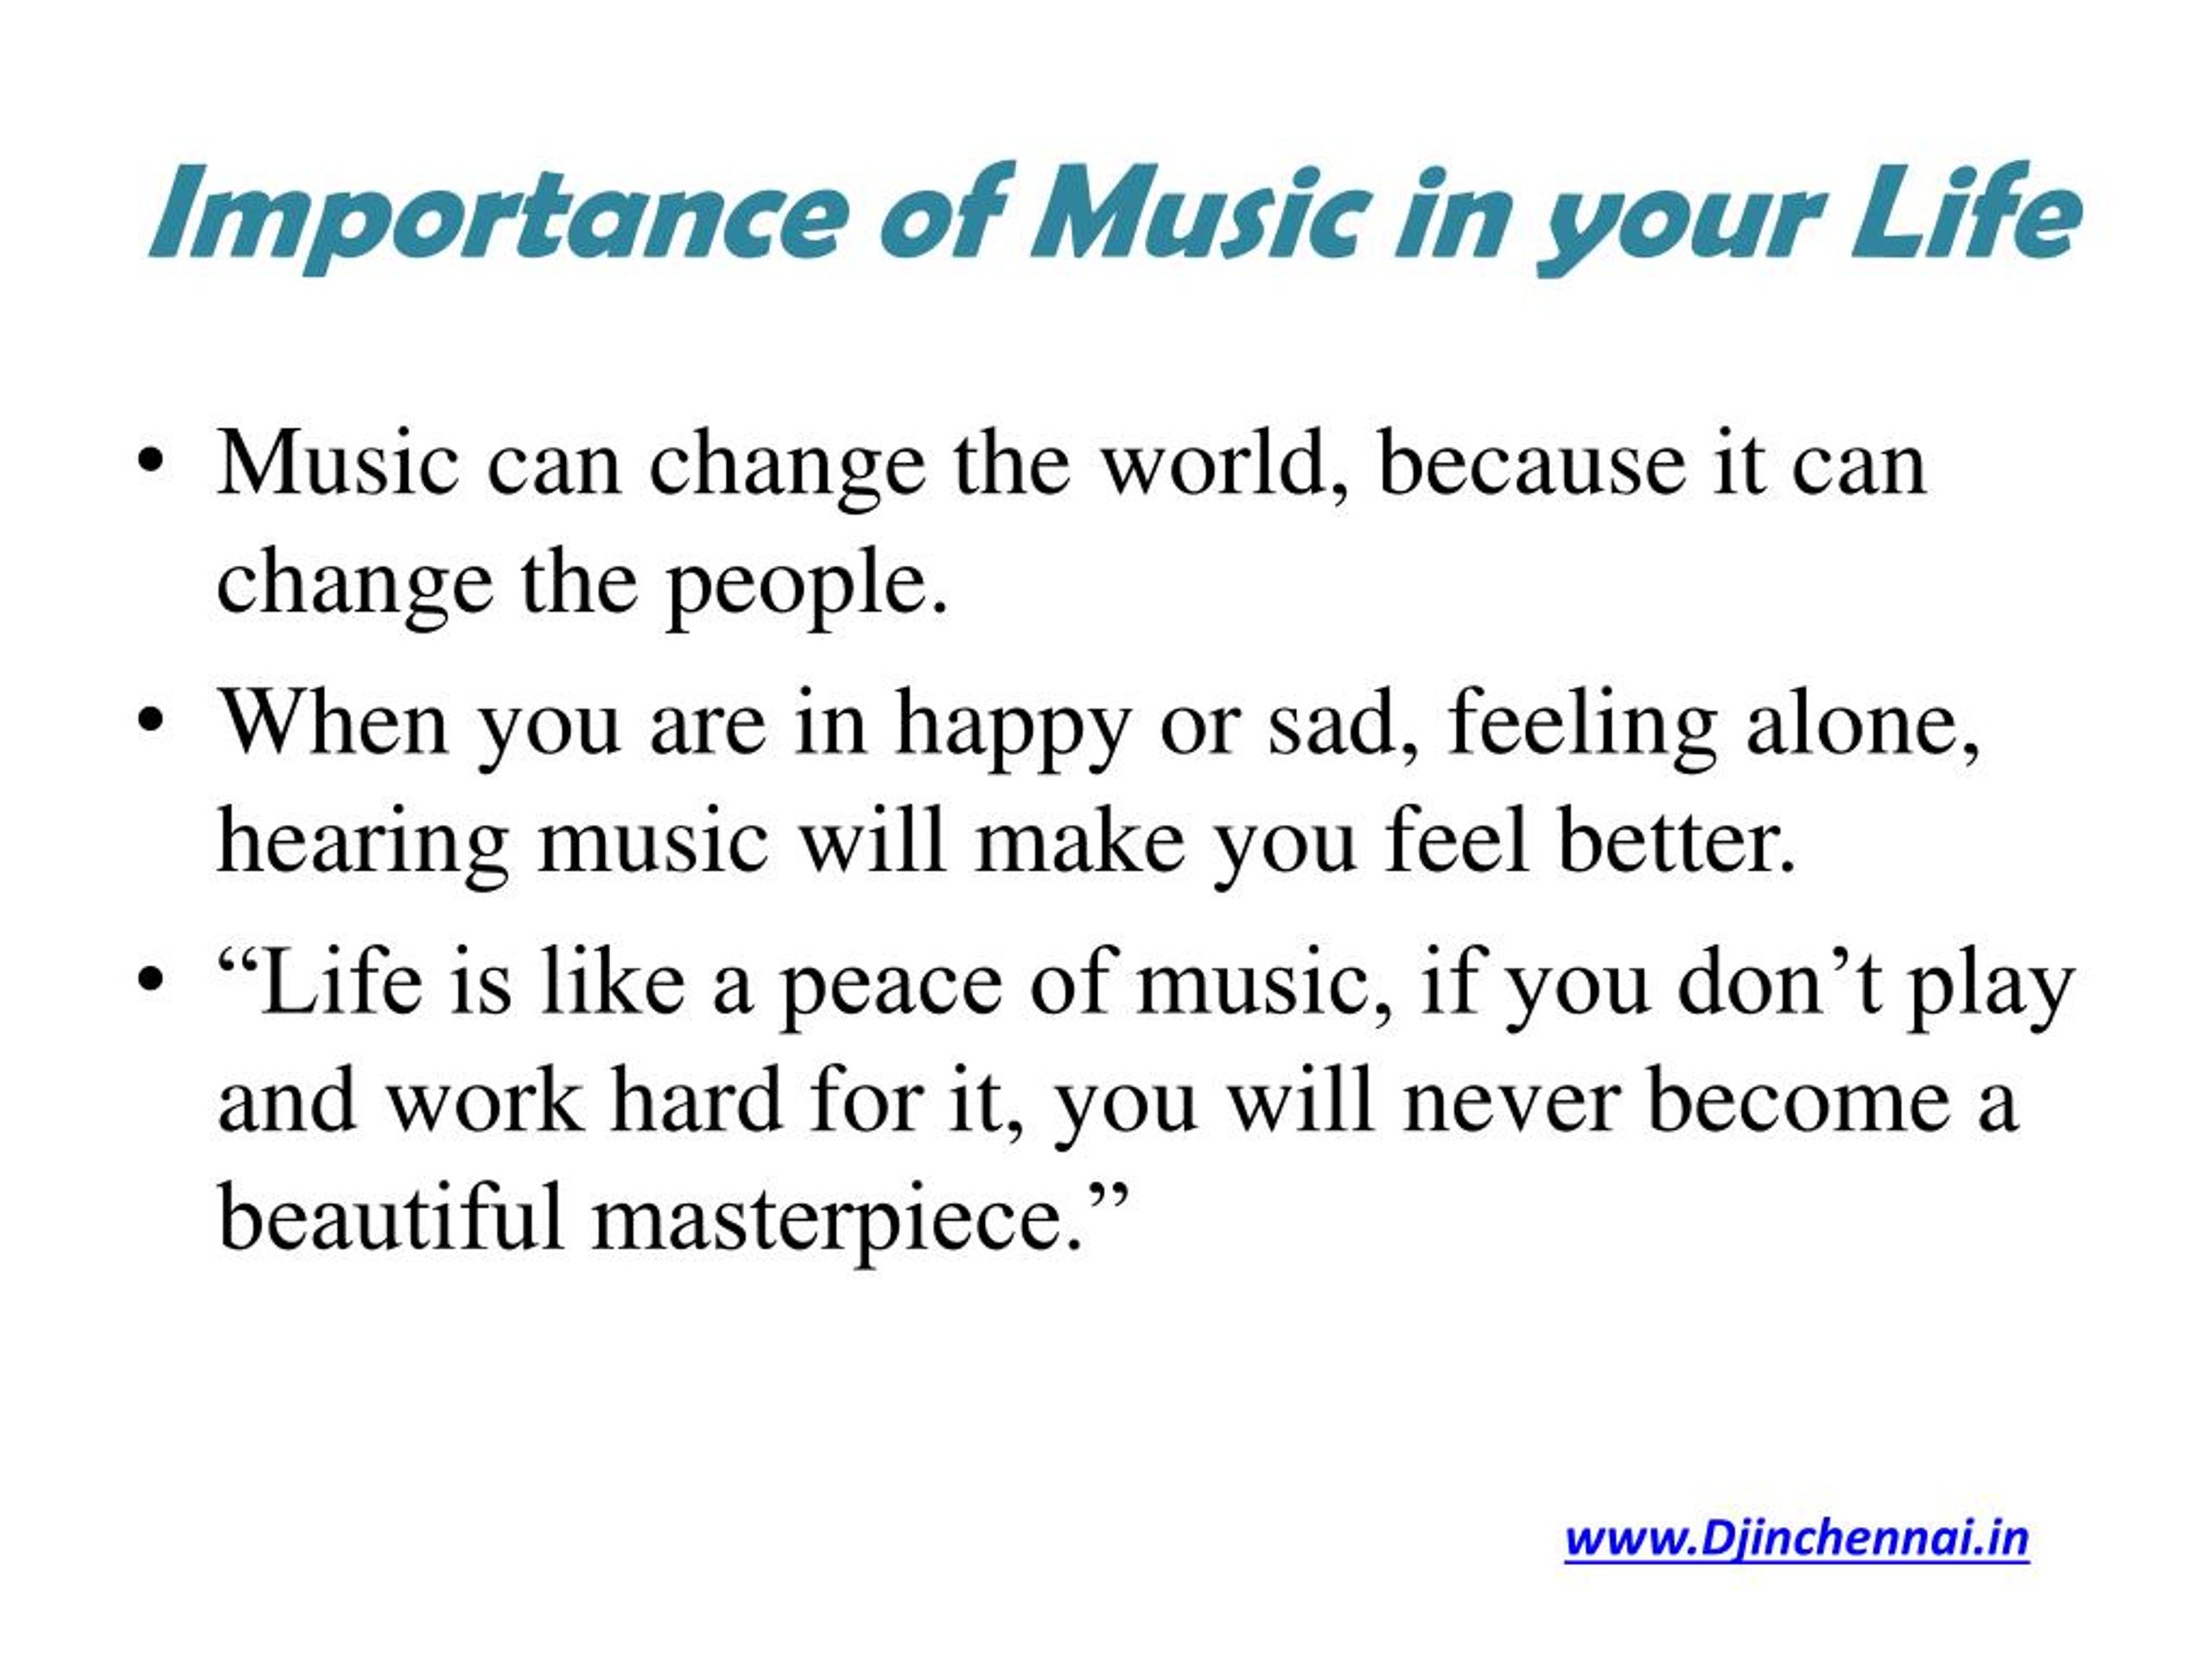 essay on importance of music in life